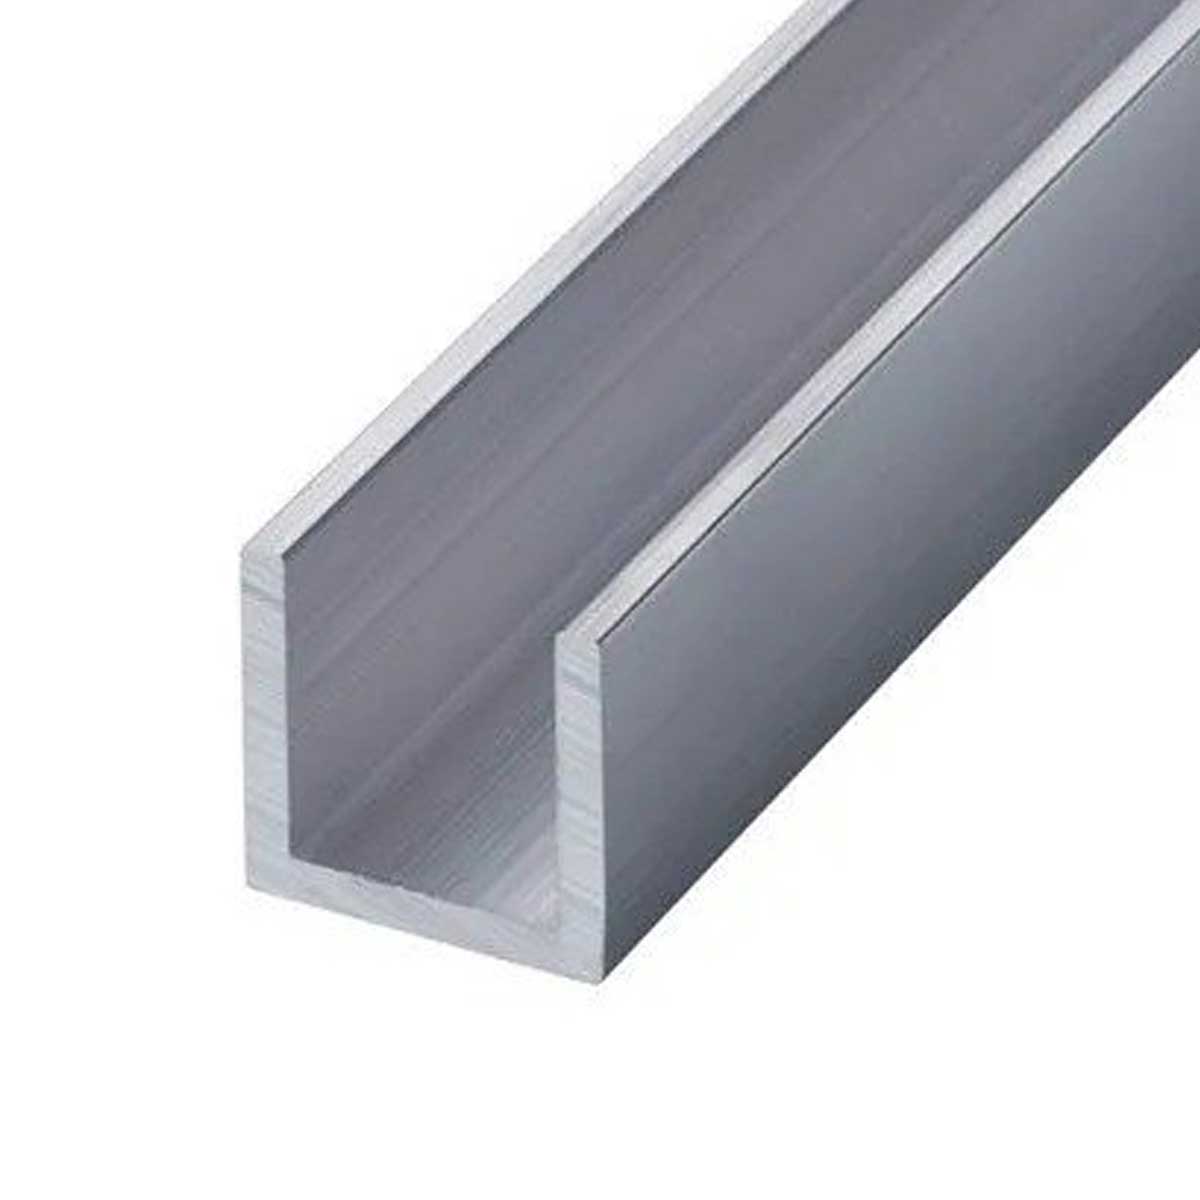 Aluminium C Channel For Construction Manufacturers, Suppliers in Barmer